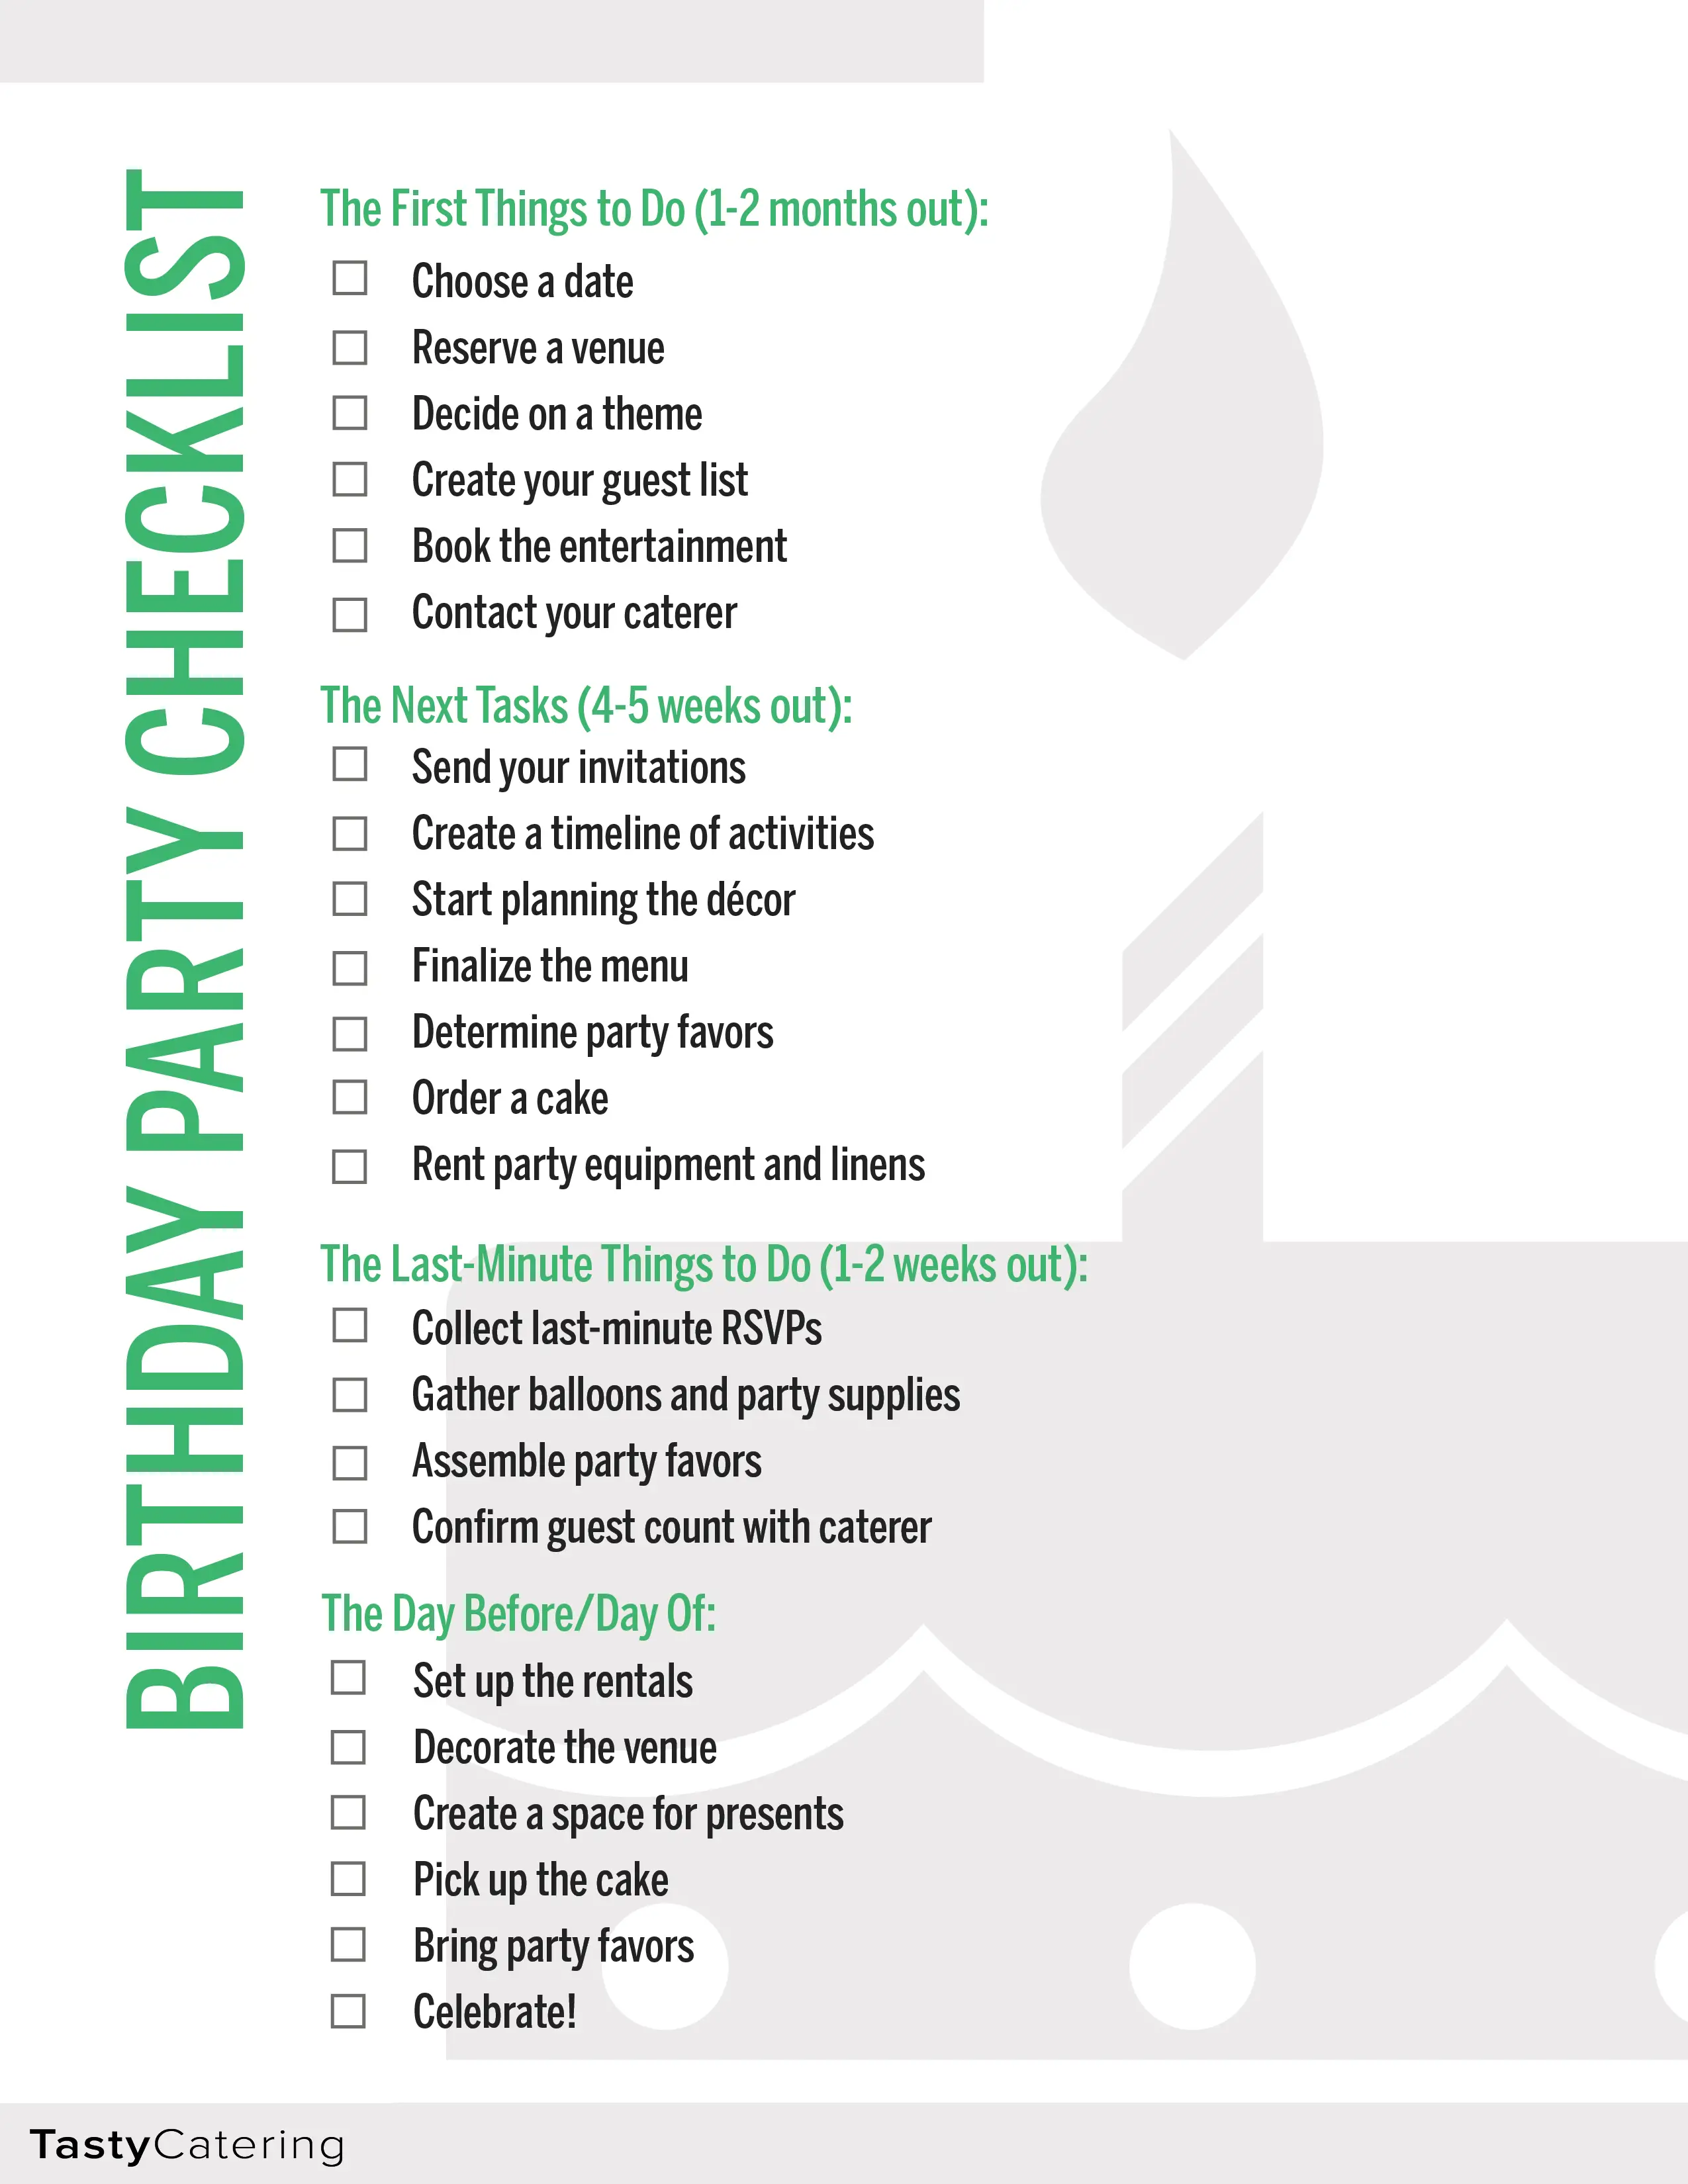 26 Life easing Birthday  Party  Checklists KittyBabyLove com